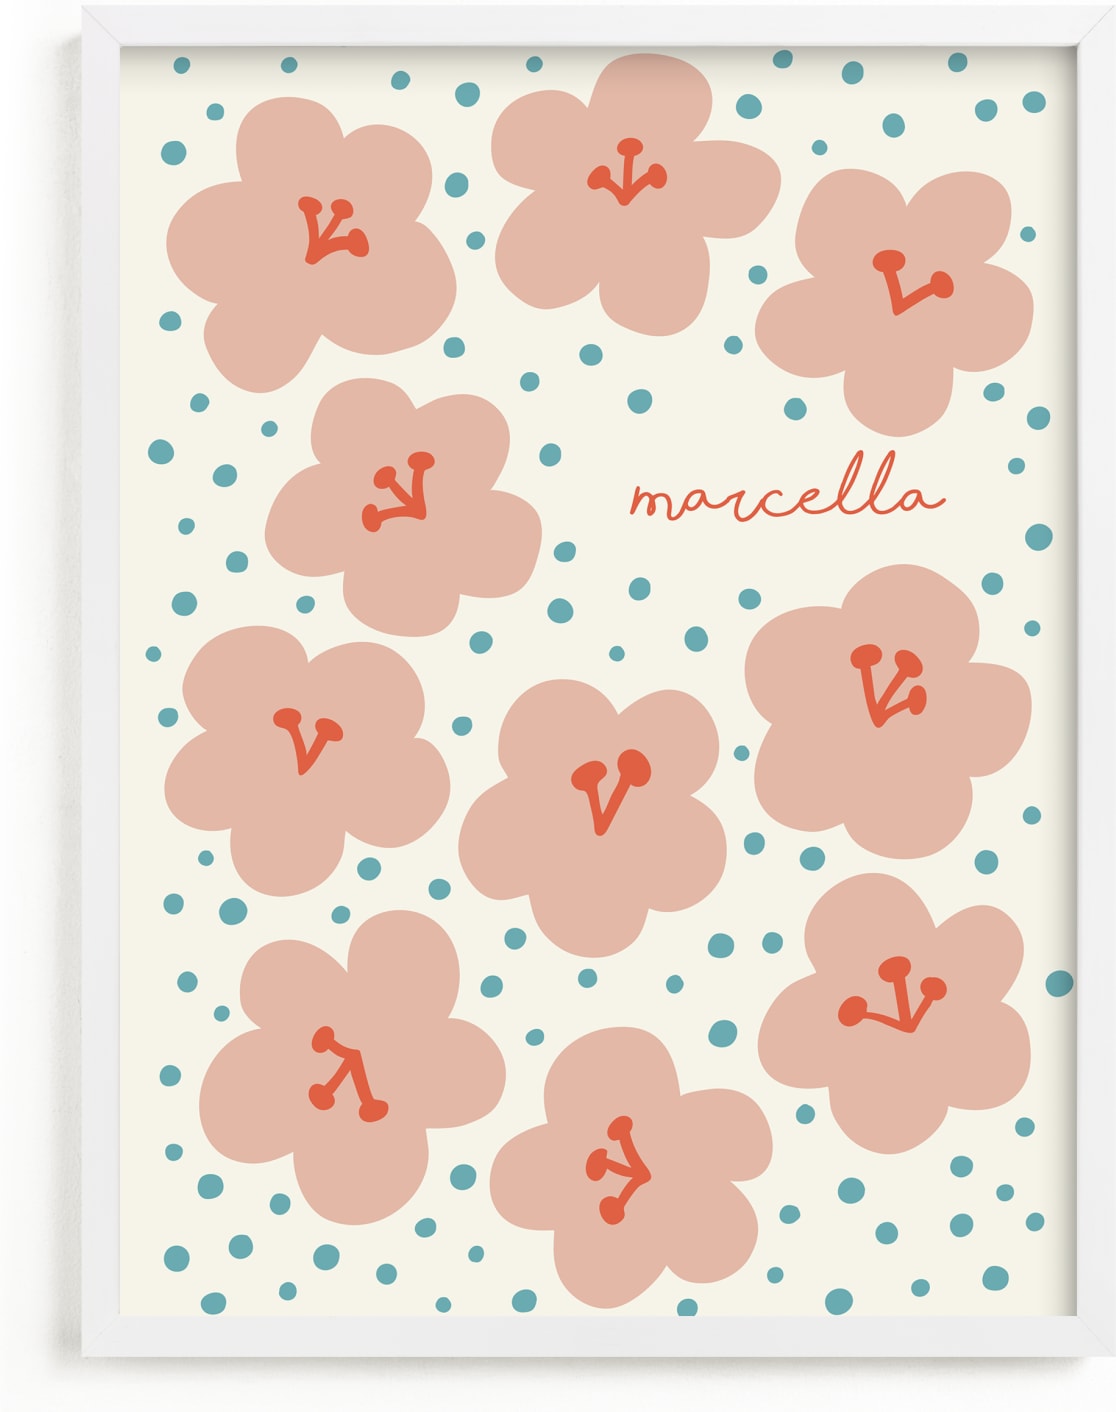 This is a ivory personalized art for kid by Nieves Herranz called Marcella.